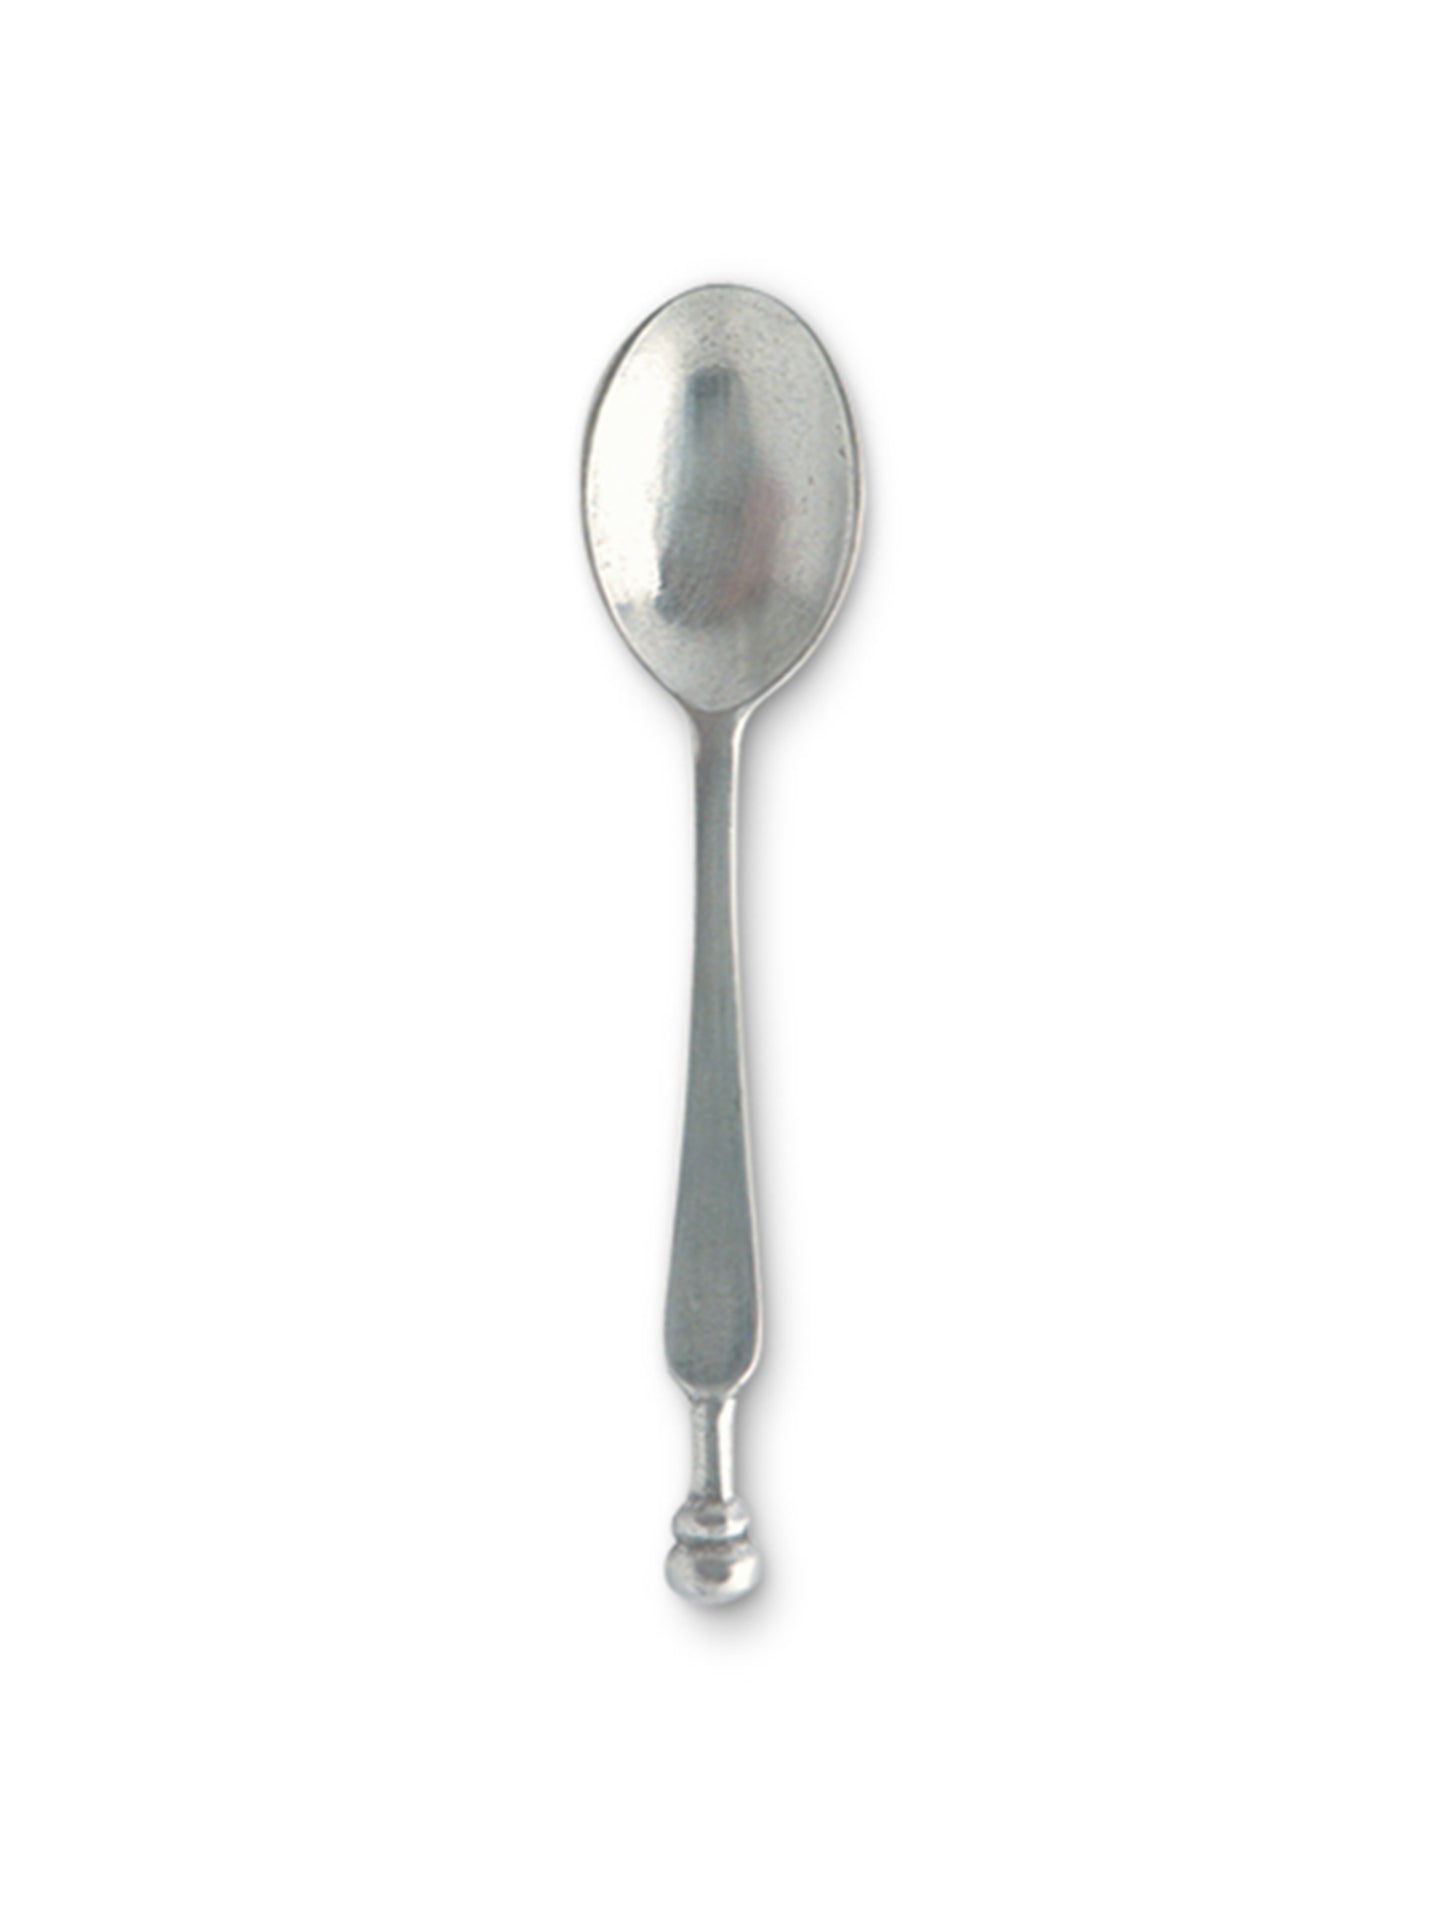 MATCH Pewter Taper Ball Spoon Weston Table